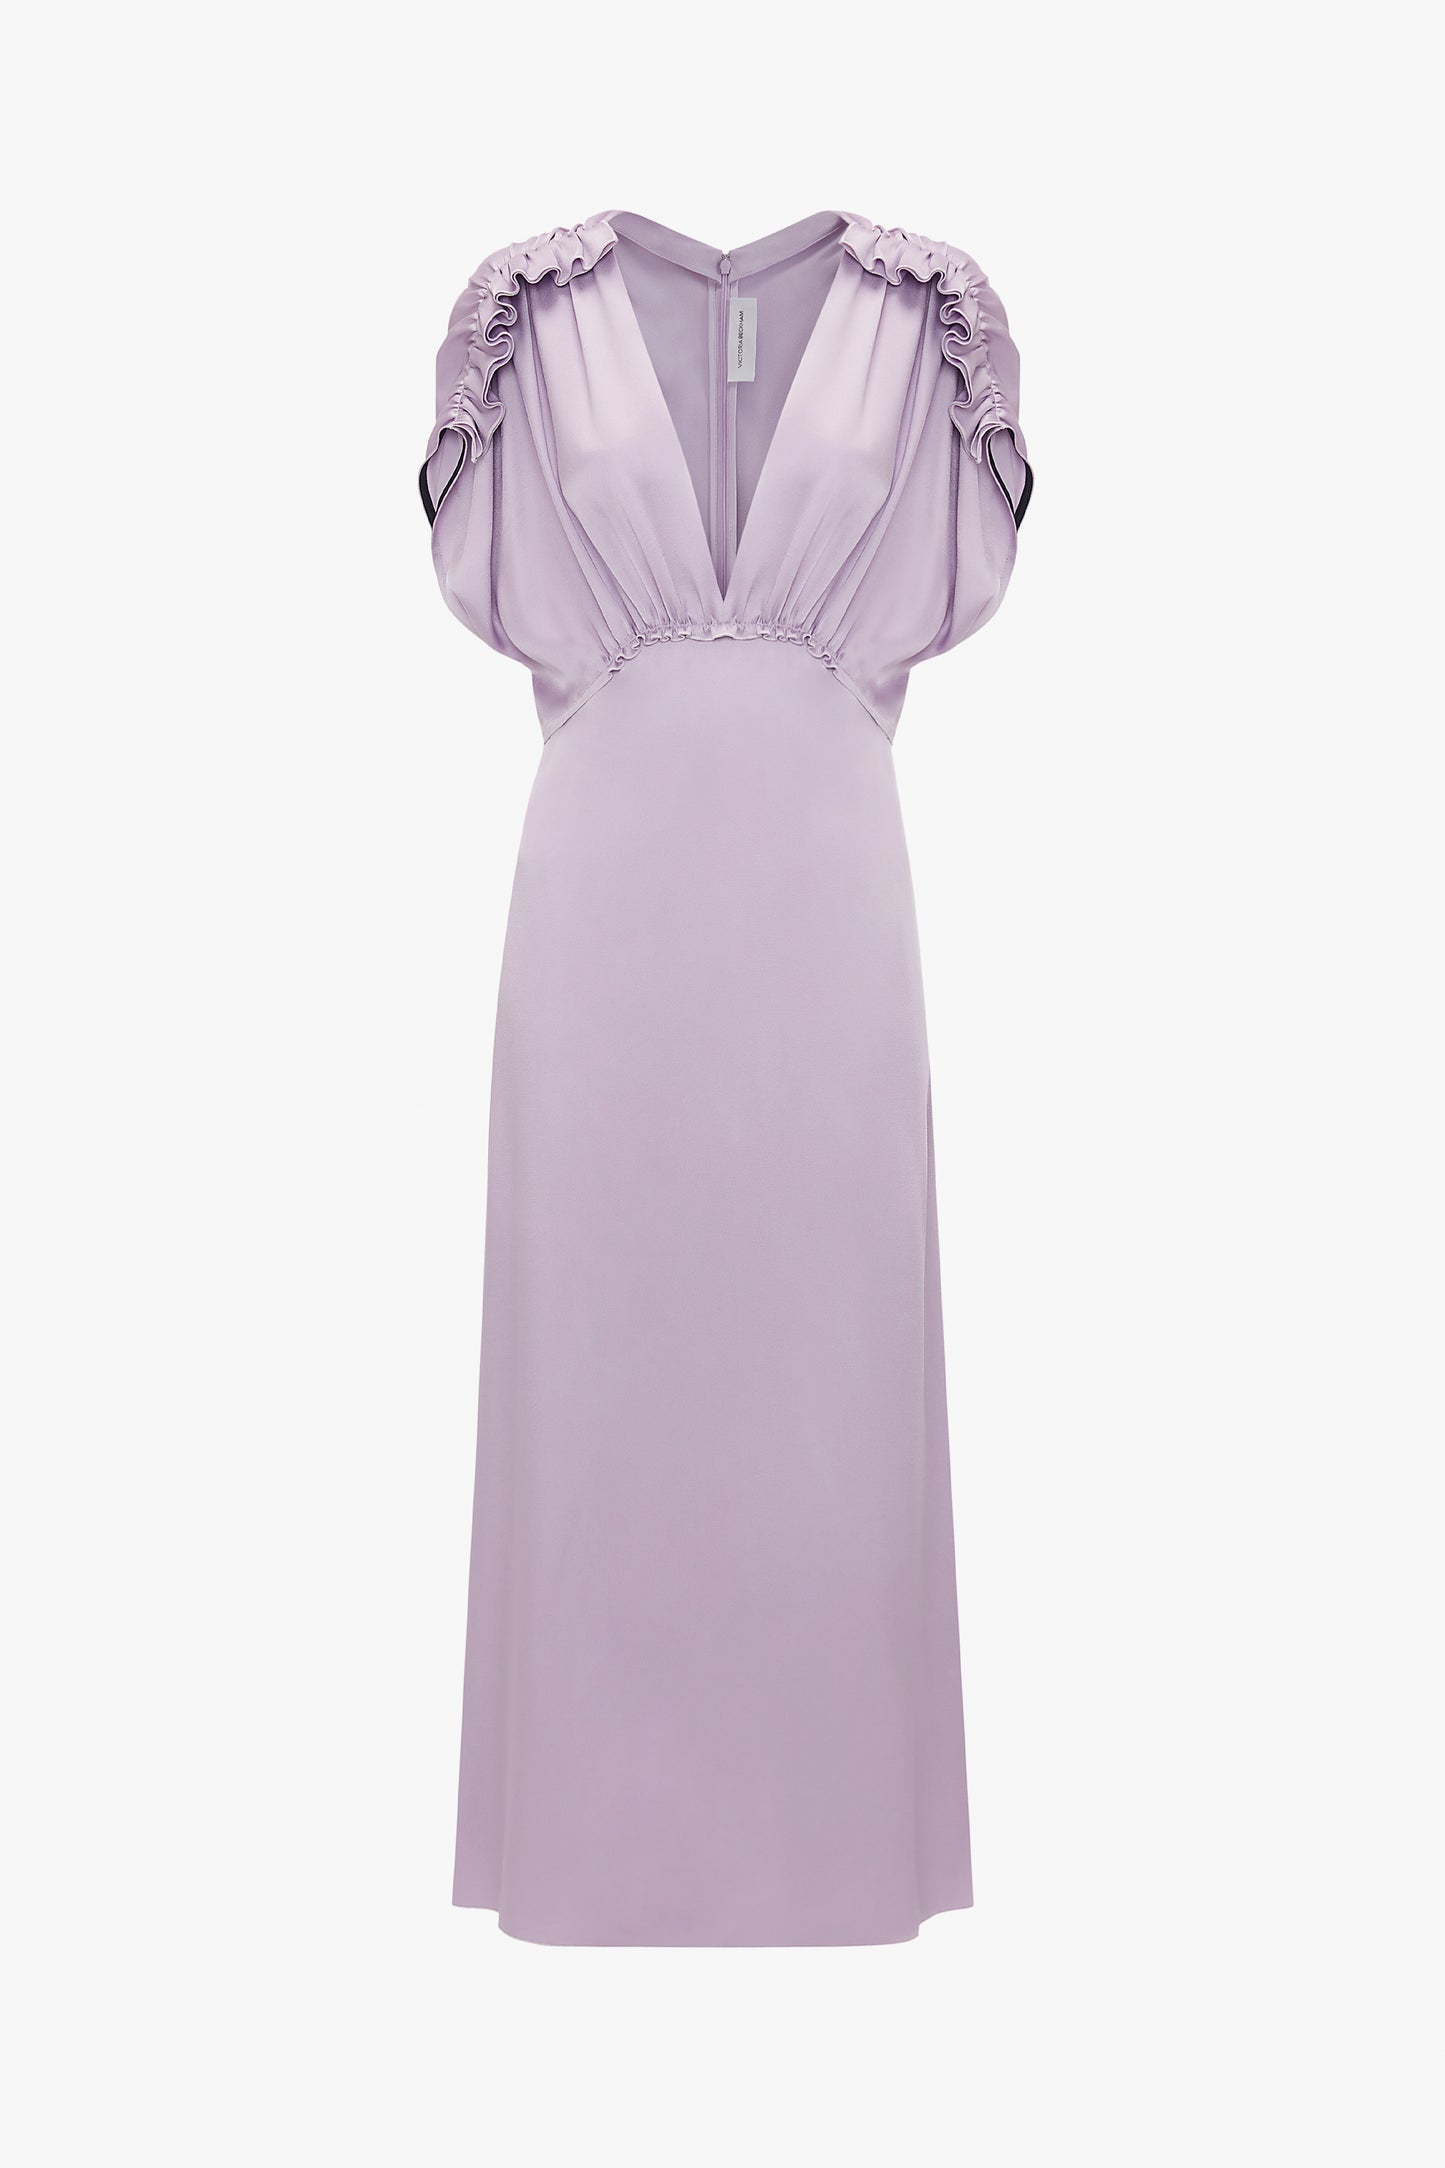 The Victoria Beckham V-Neck Ruffle Midi Dress In Petunia features a deep V-neckline, ruched sleeves, and a cinched waist, perfect for those seeking elegant dresses. Displayed on a white background, this lavender masterpiece exudes sophistication.